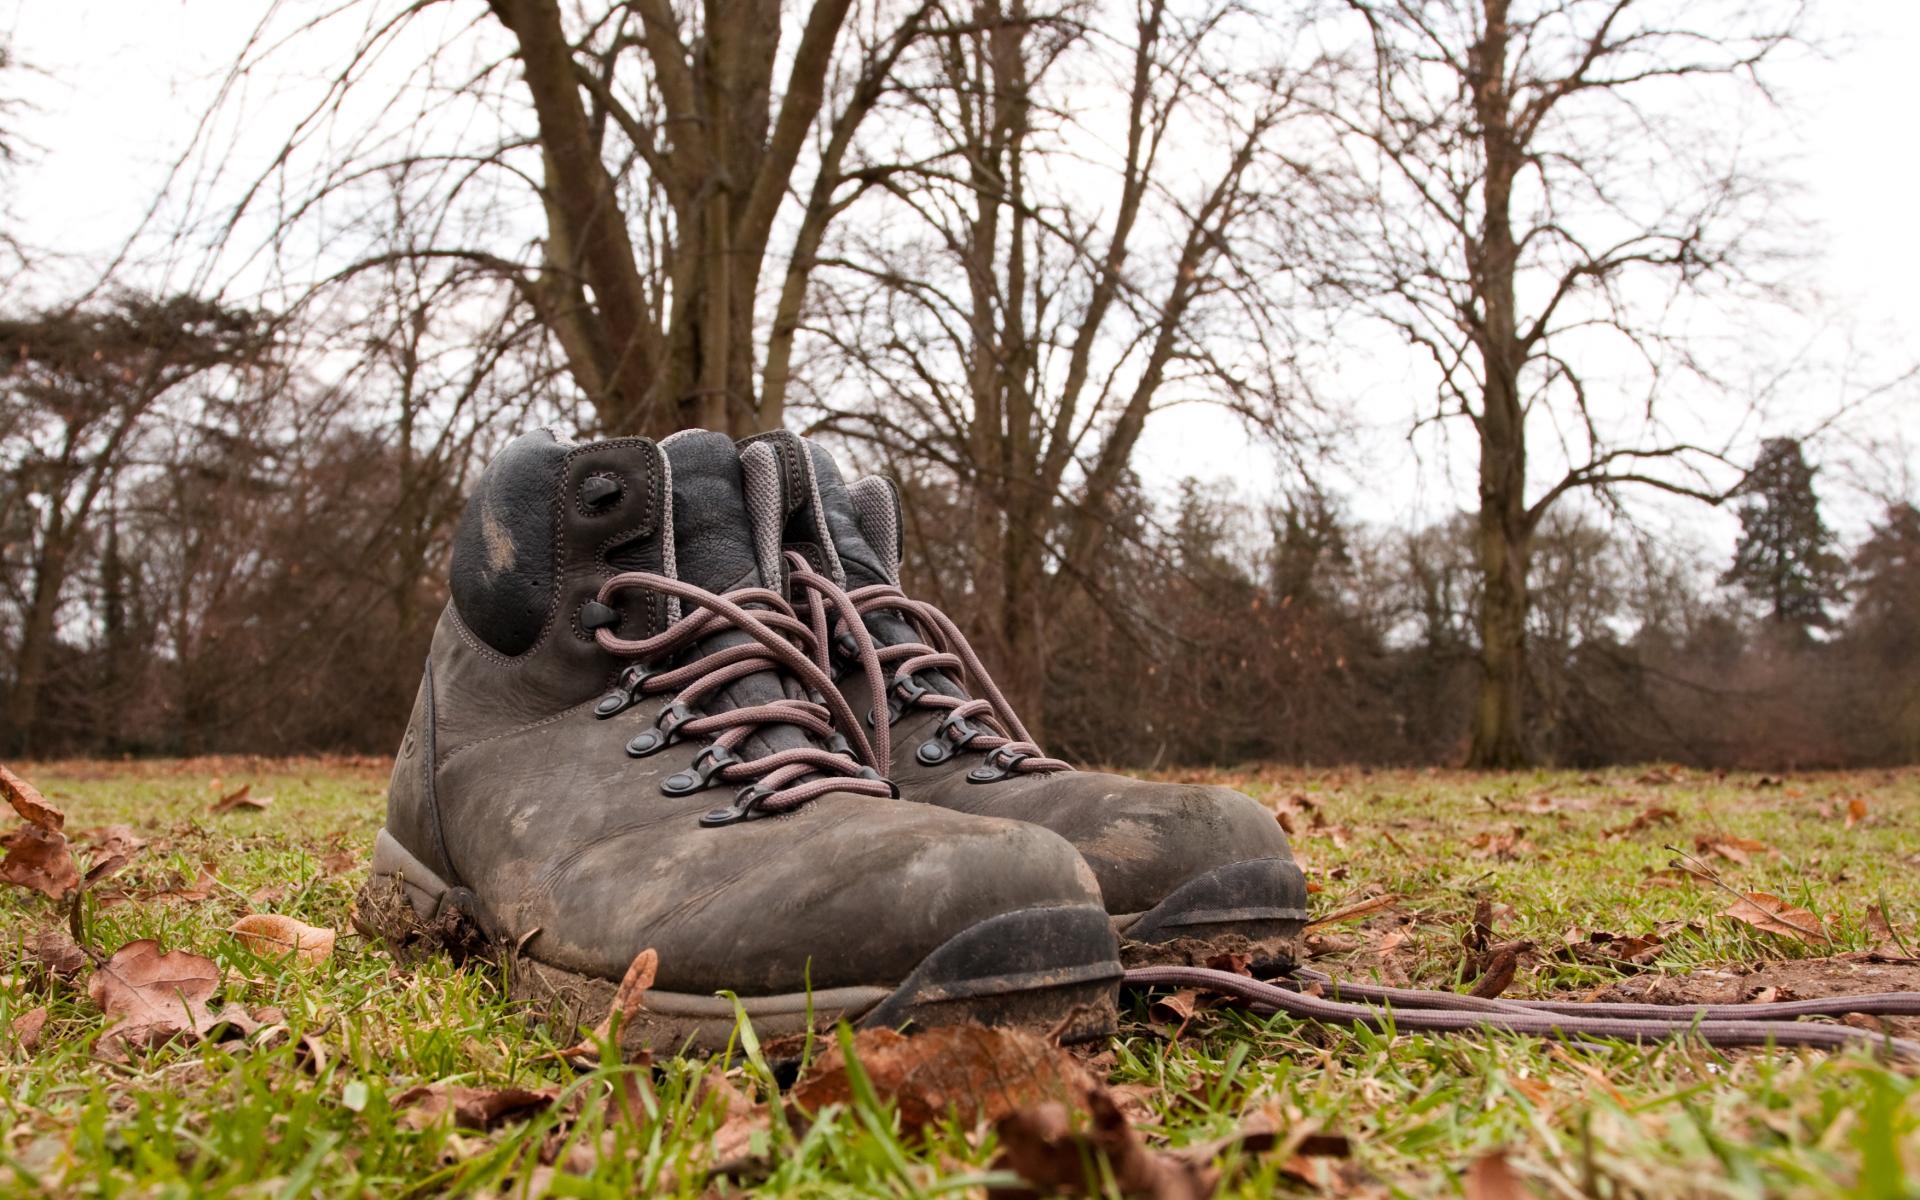 Essential walking holiday kit: a pair of boots